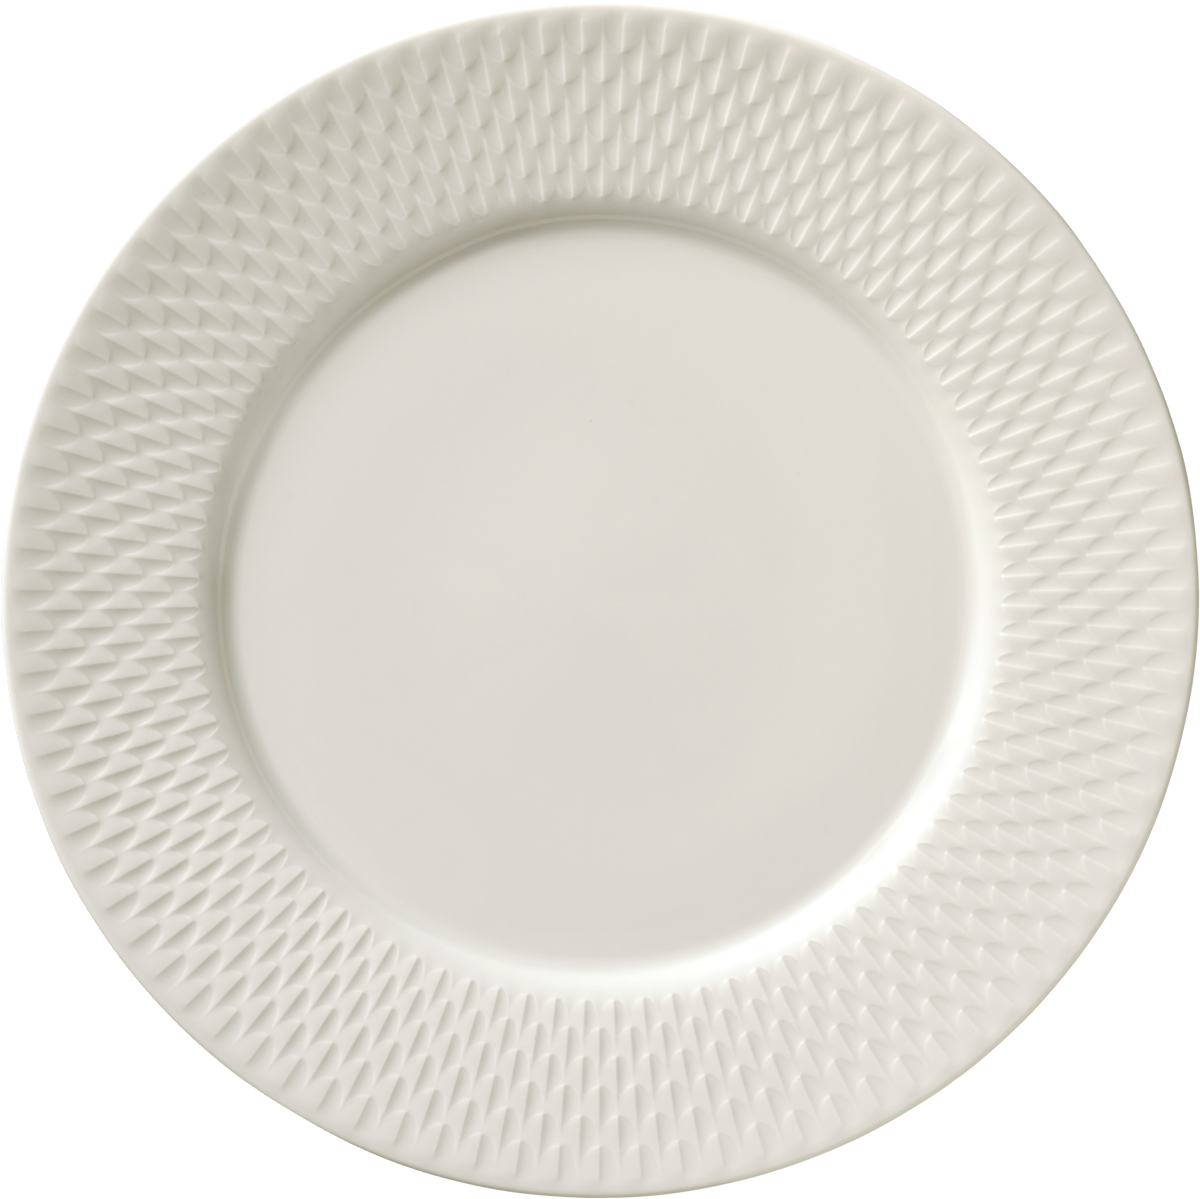 Plate flat round with rim embossed 32cm